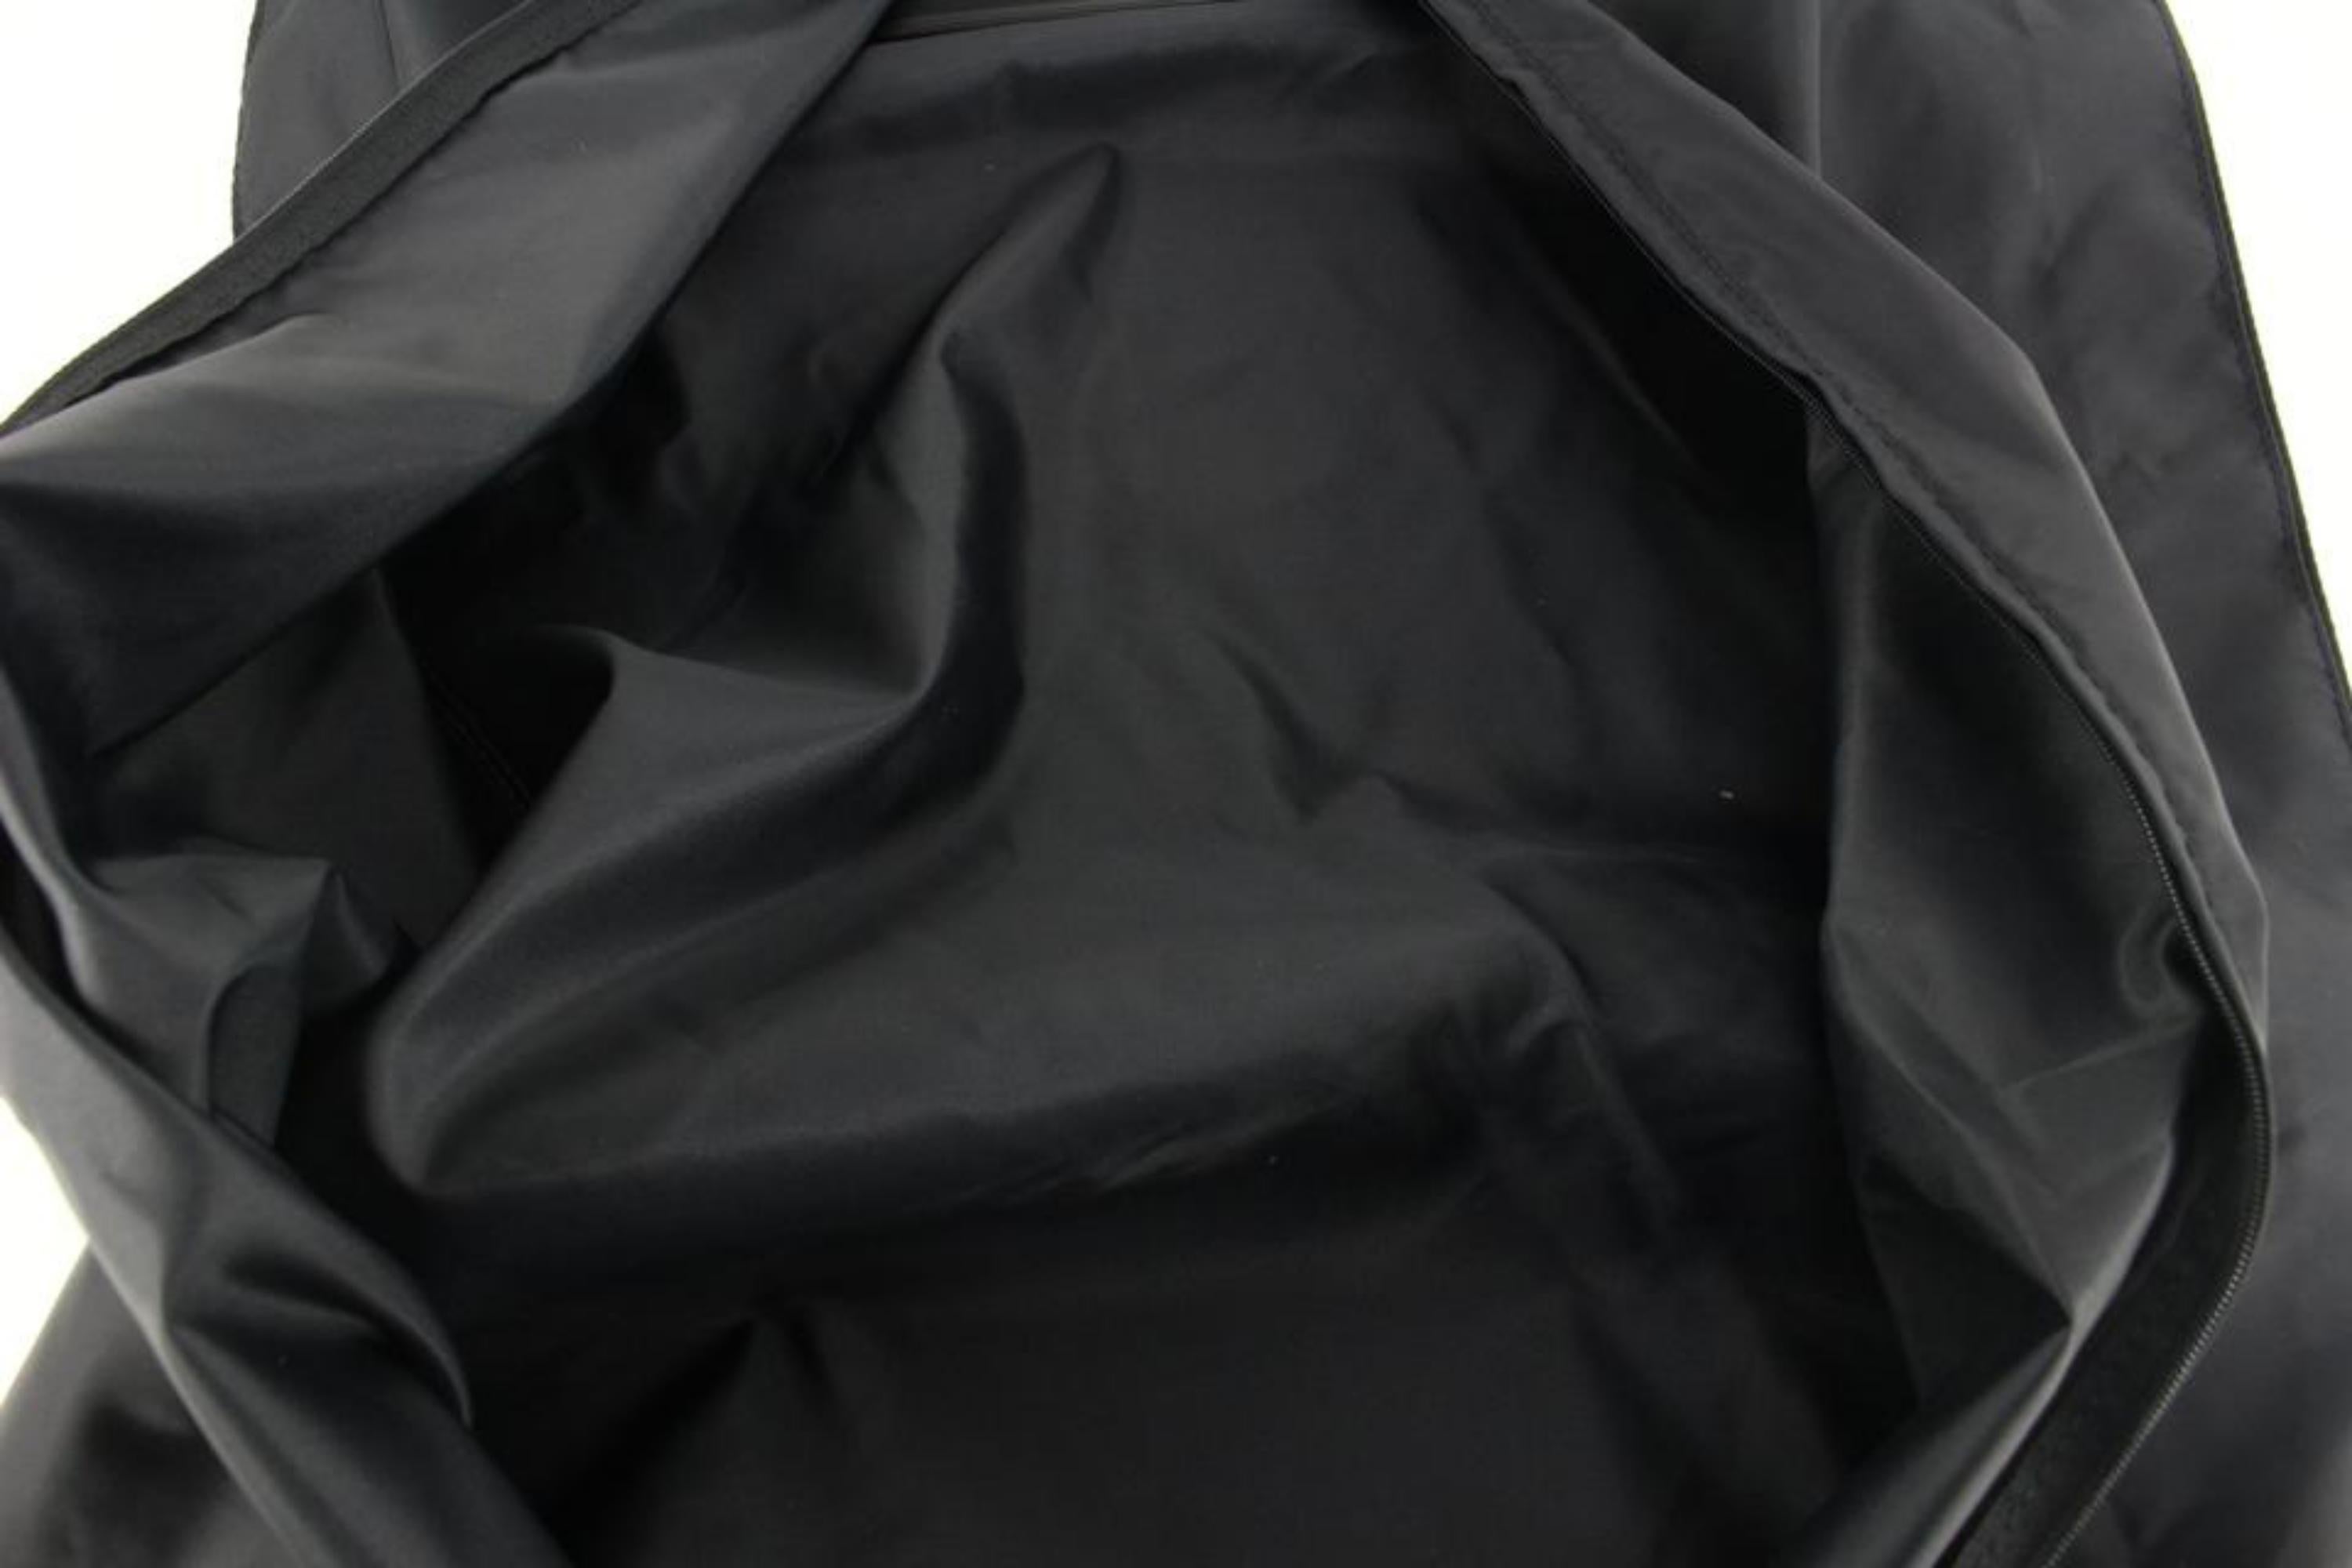 Louis Vuitton Black Nylon Garment Cover with Hanger 16lk616s In Excellent Condition For Sale In Dix hills, NY